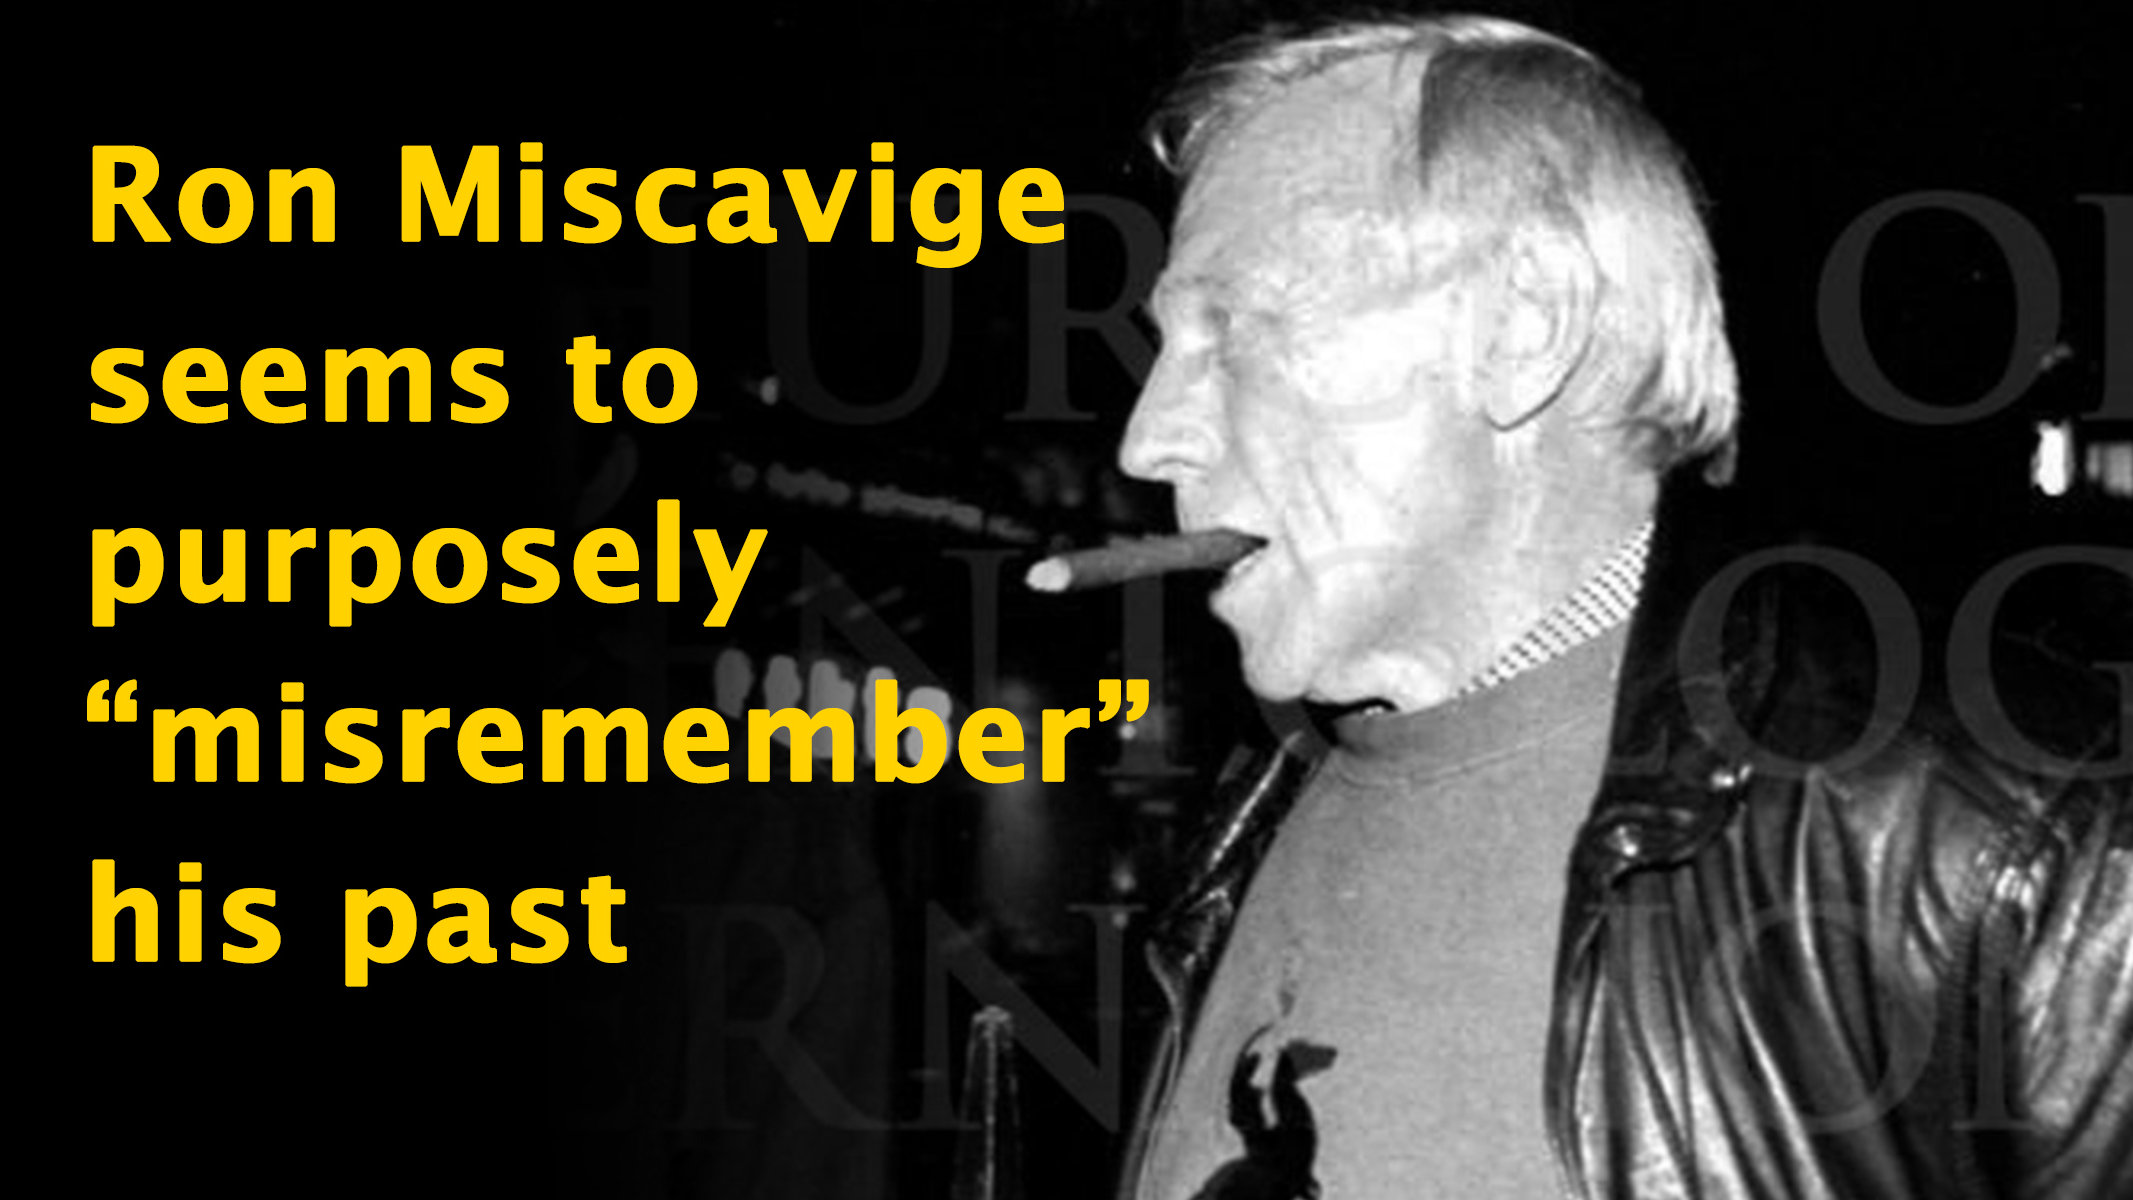 Ron Miscavige: The Life He Had